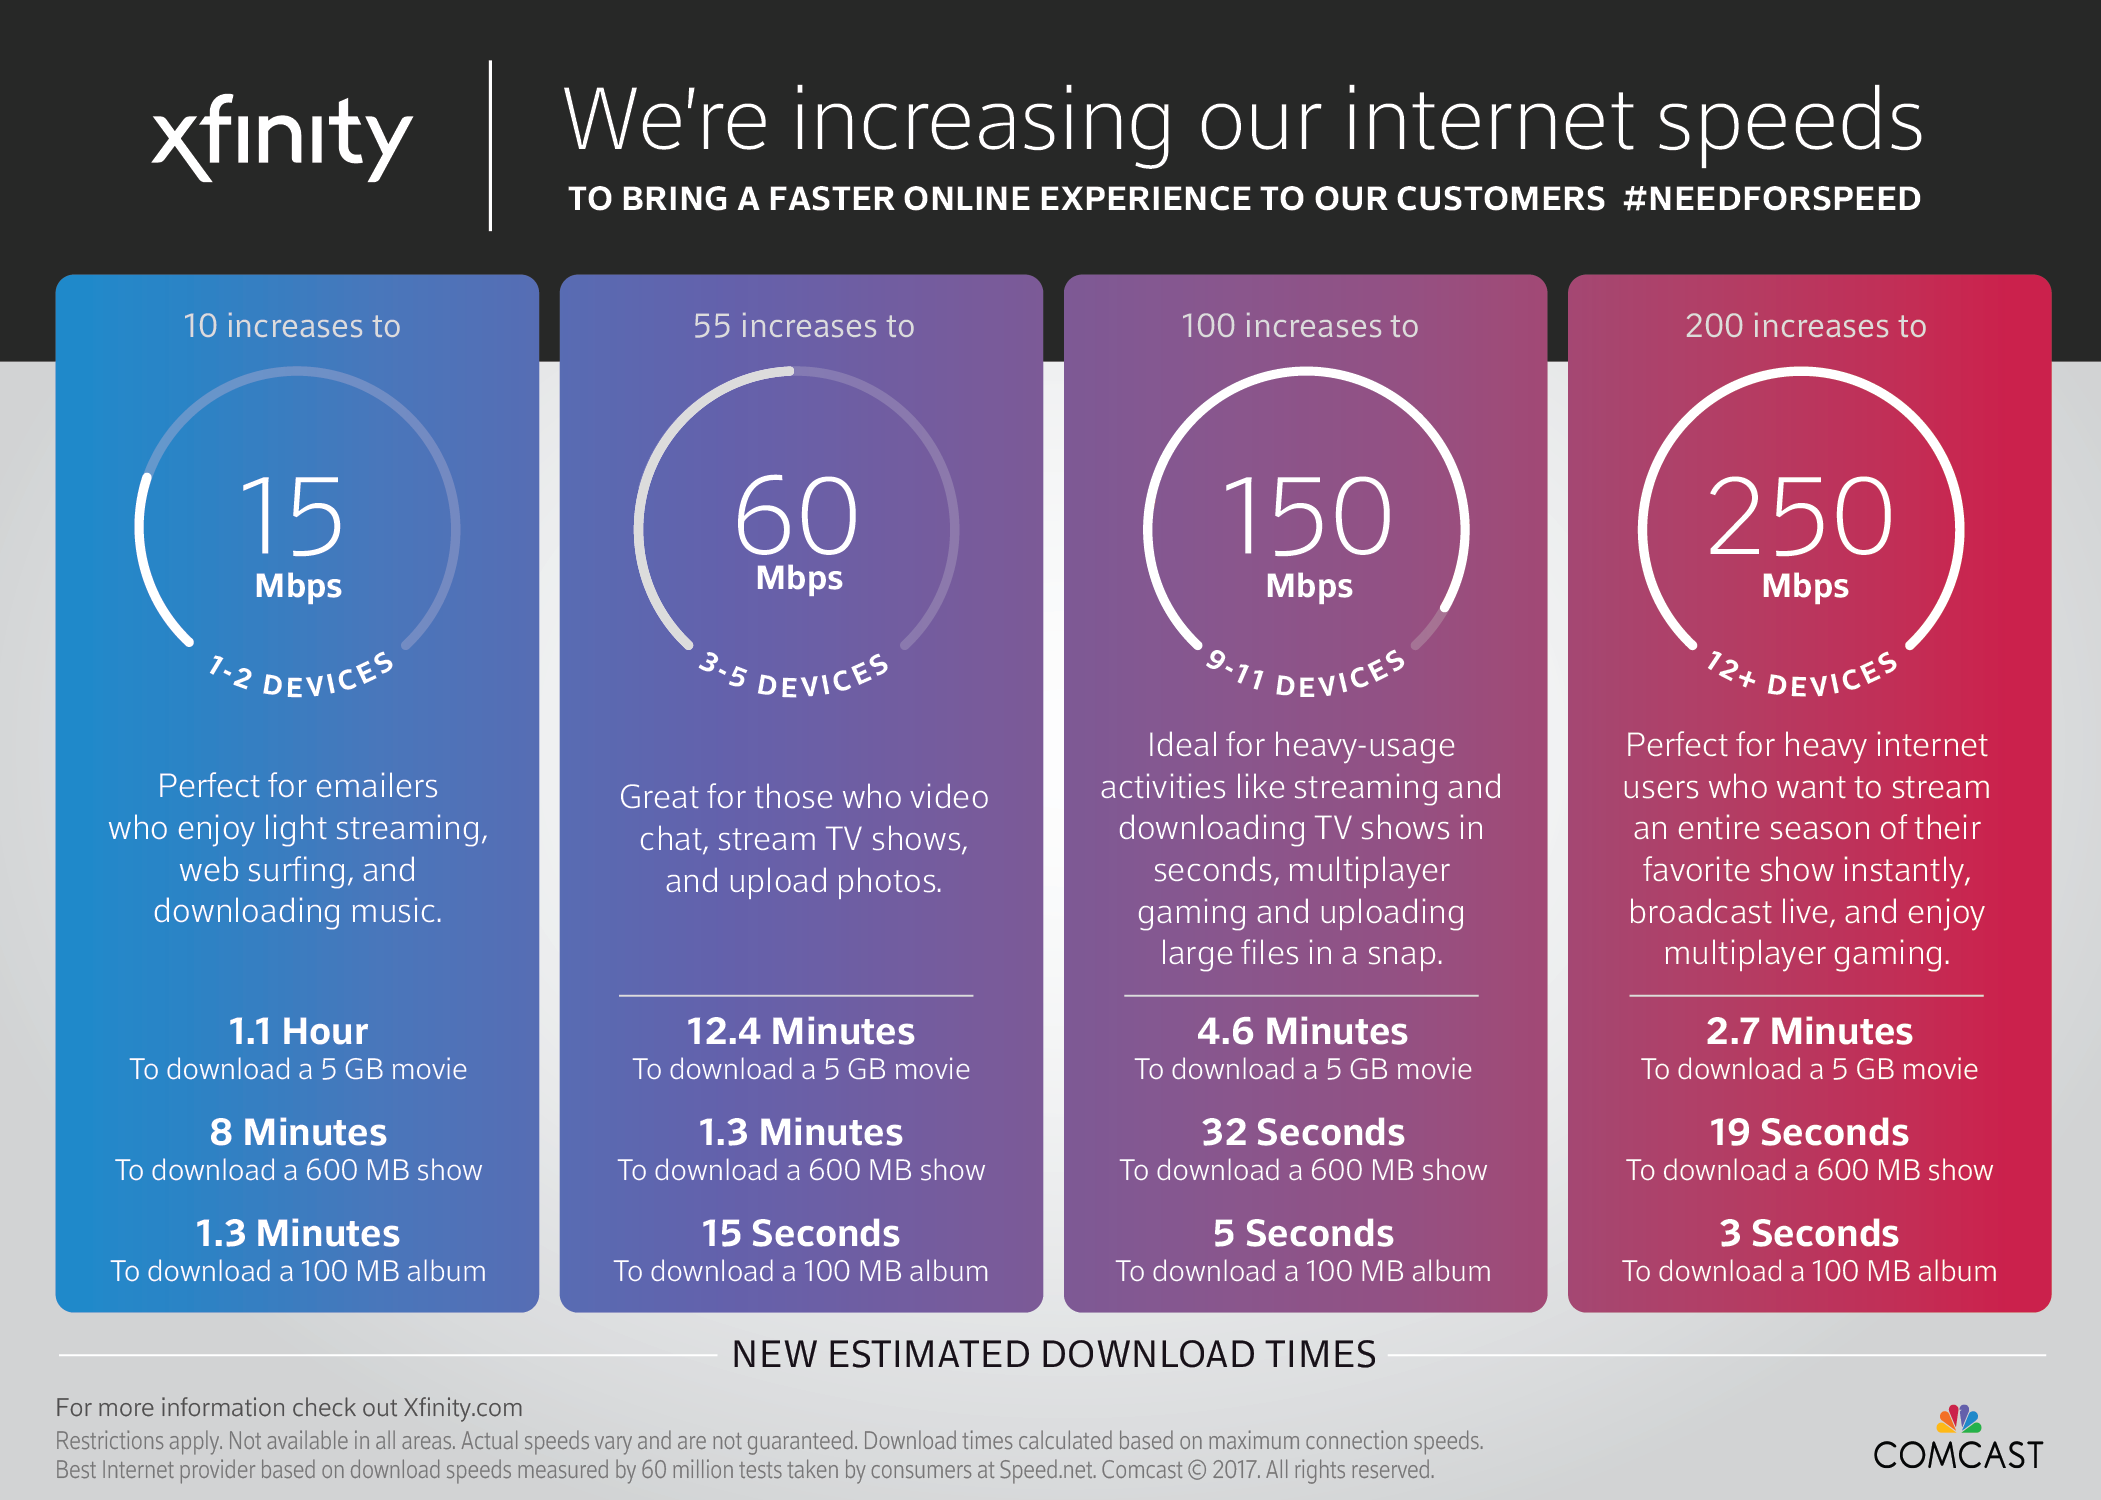 Comcast increases speeds at no additional cost for customers